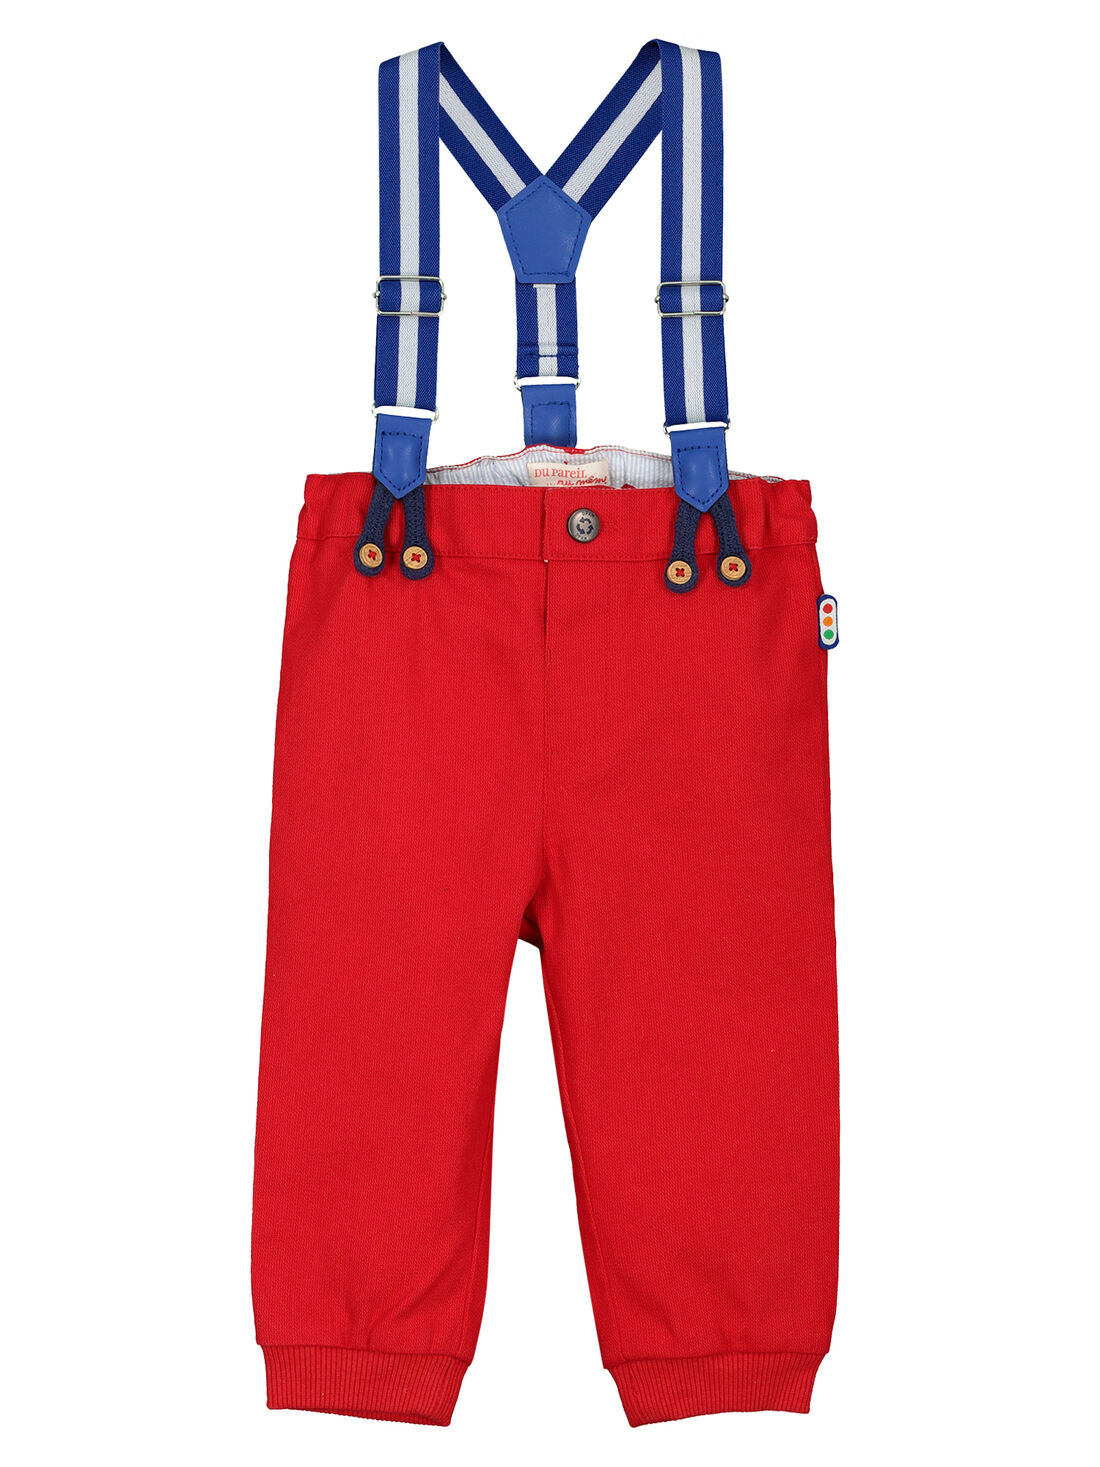 Trousers with braces  Khaki green  Kids  HM IN